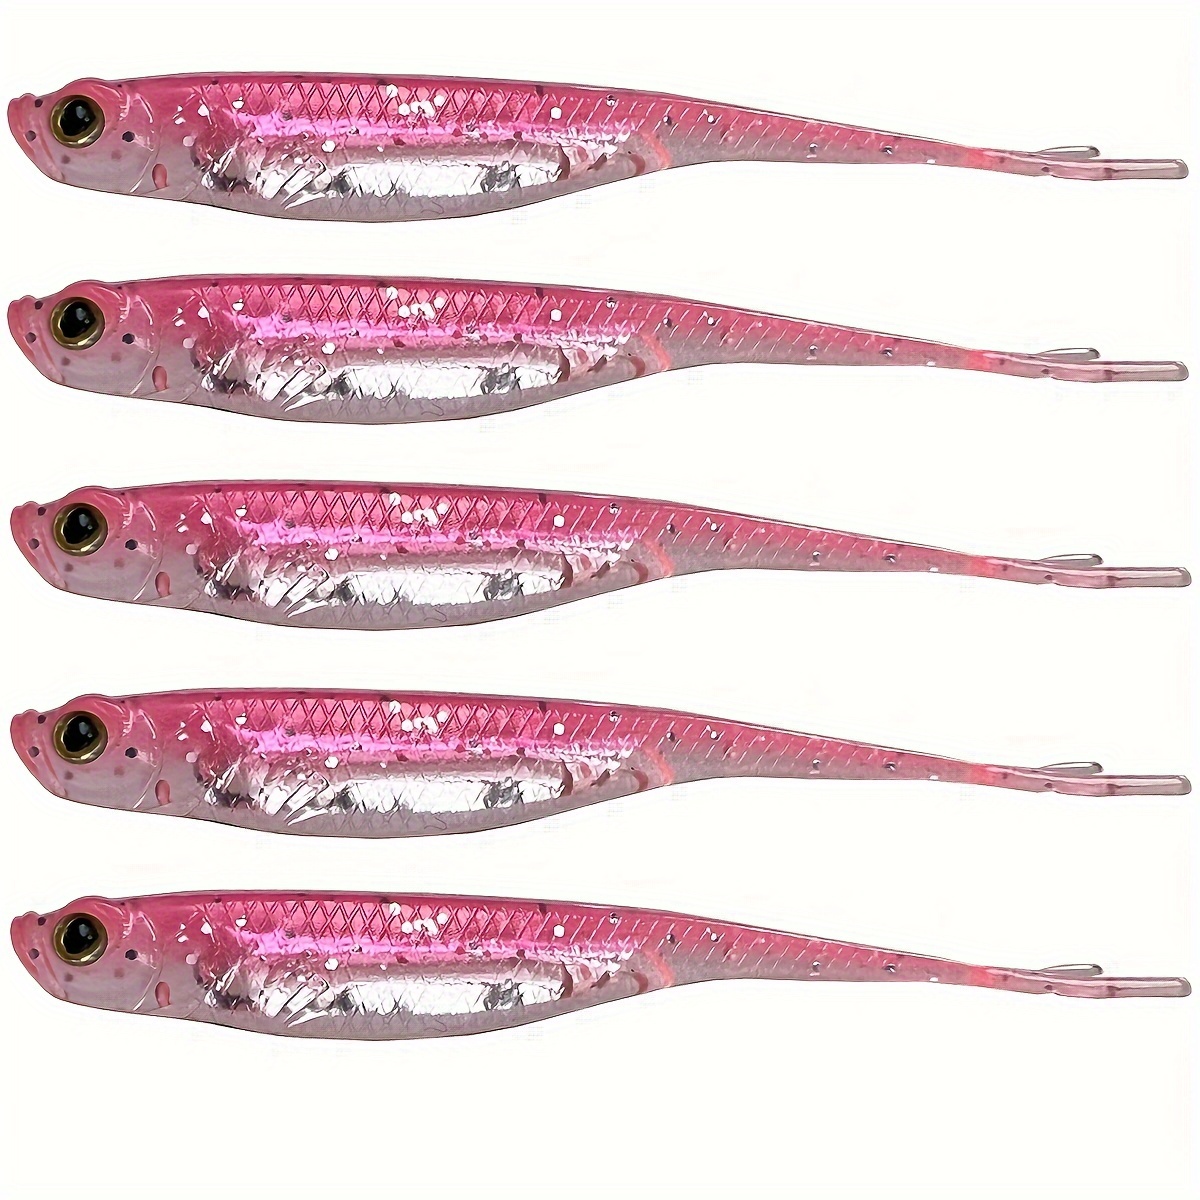 5 Fishing Tackle Shad Swimbait Paddle Tail 5 inch Ribbed Soft Plastic Bait  Pink